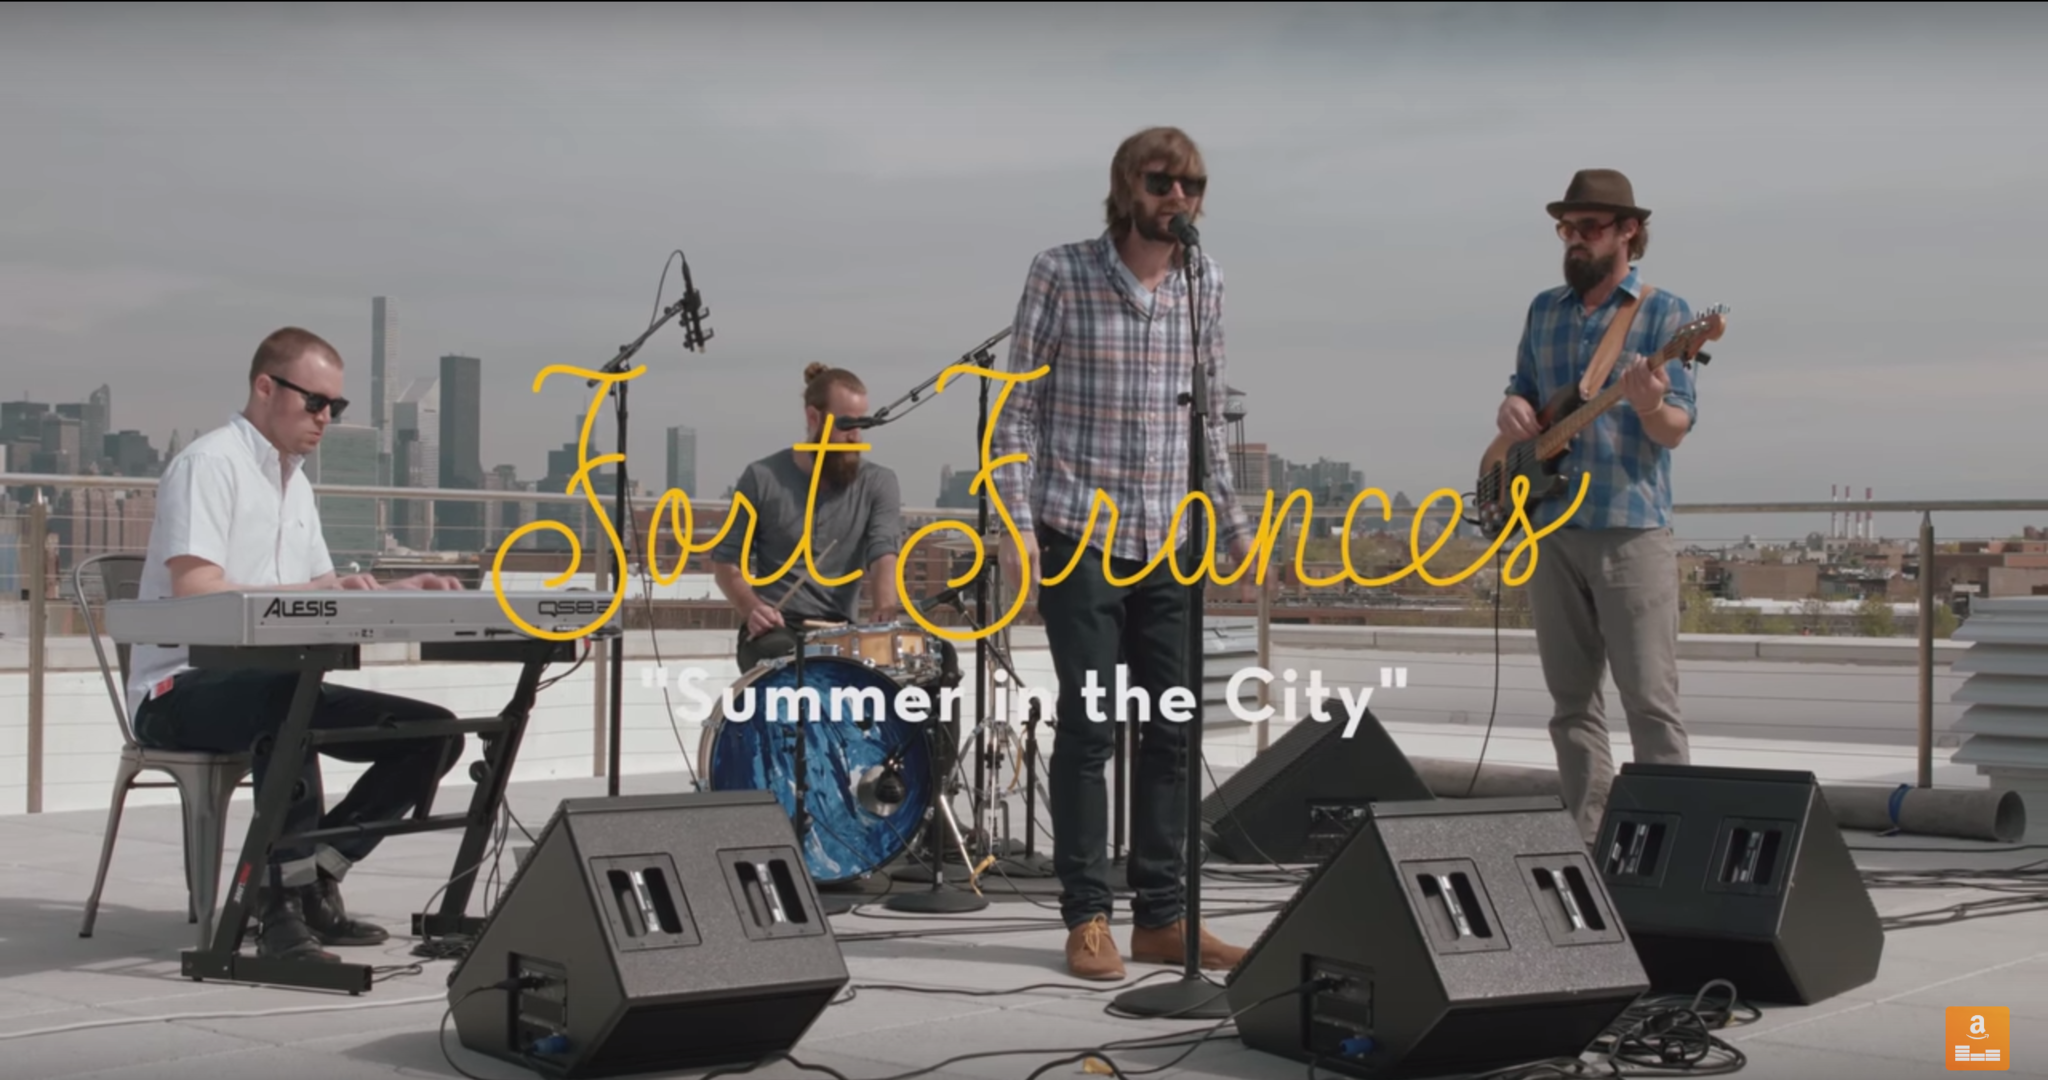 Premiere: Watch Fort Frances cover the Lovin' Spoonful's 'Summer in the City' - RedEye Chicago